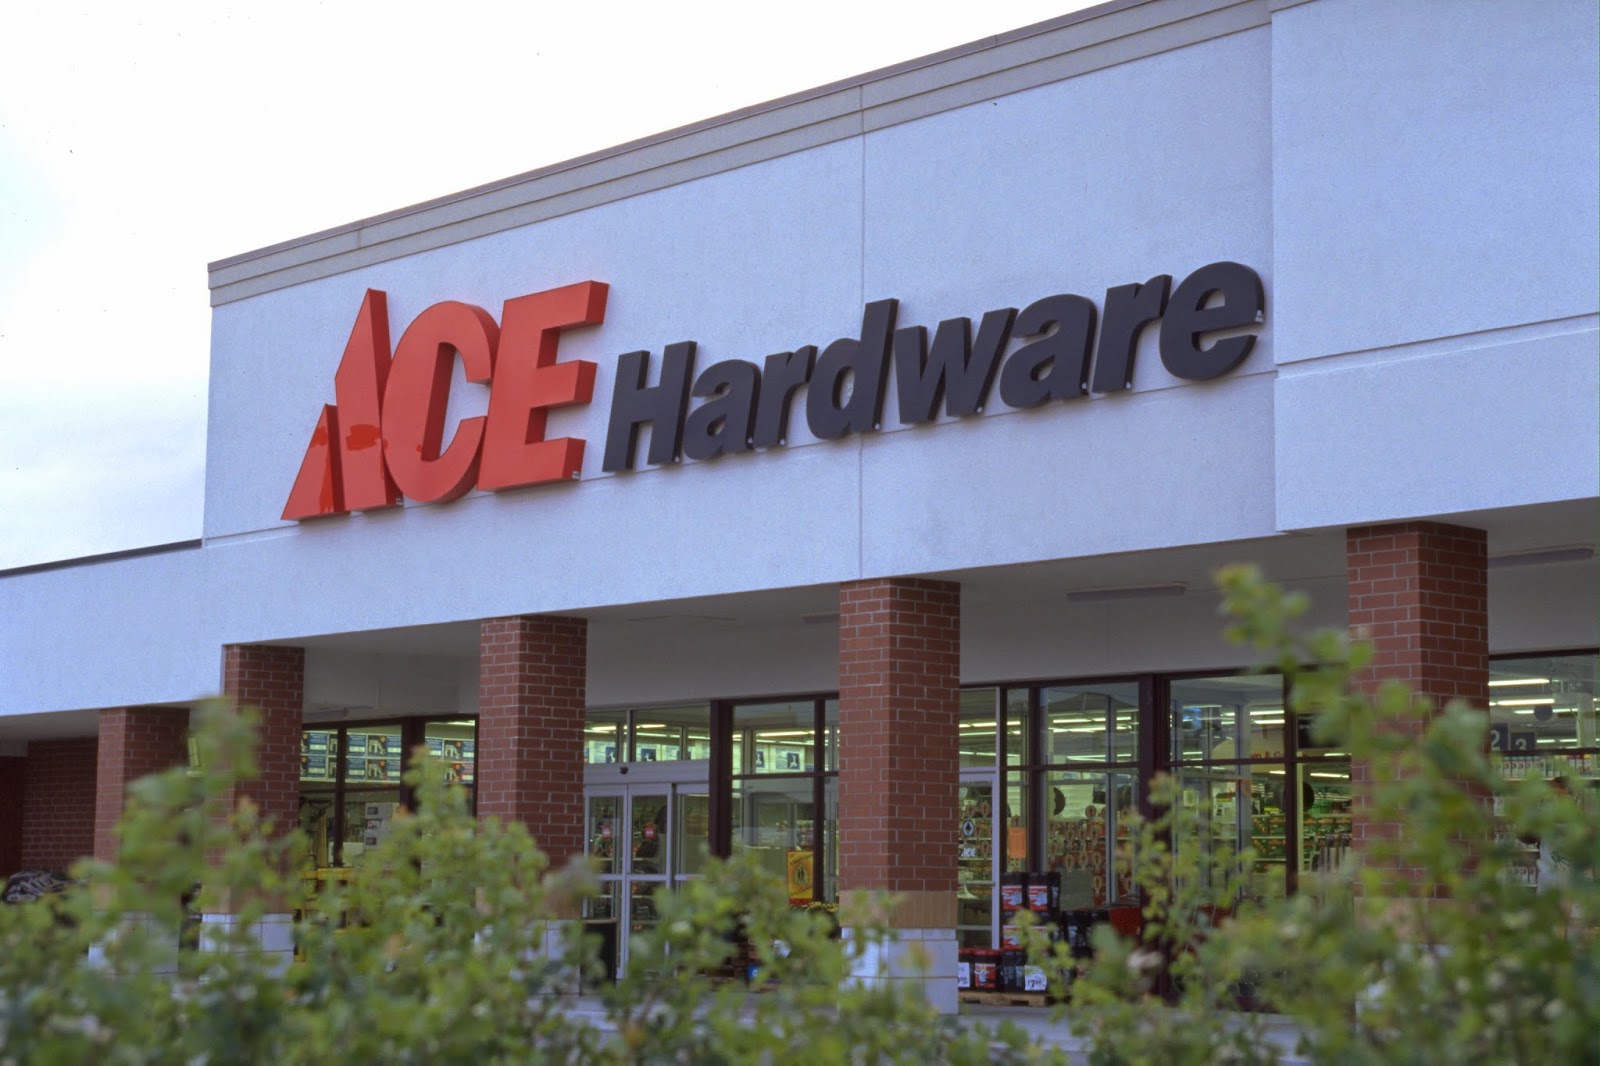 Printable Coupons In Store & Coupon Codes: Ace Hardware Coupons